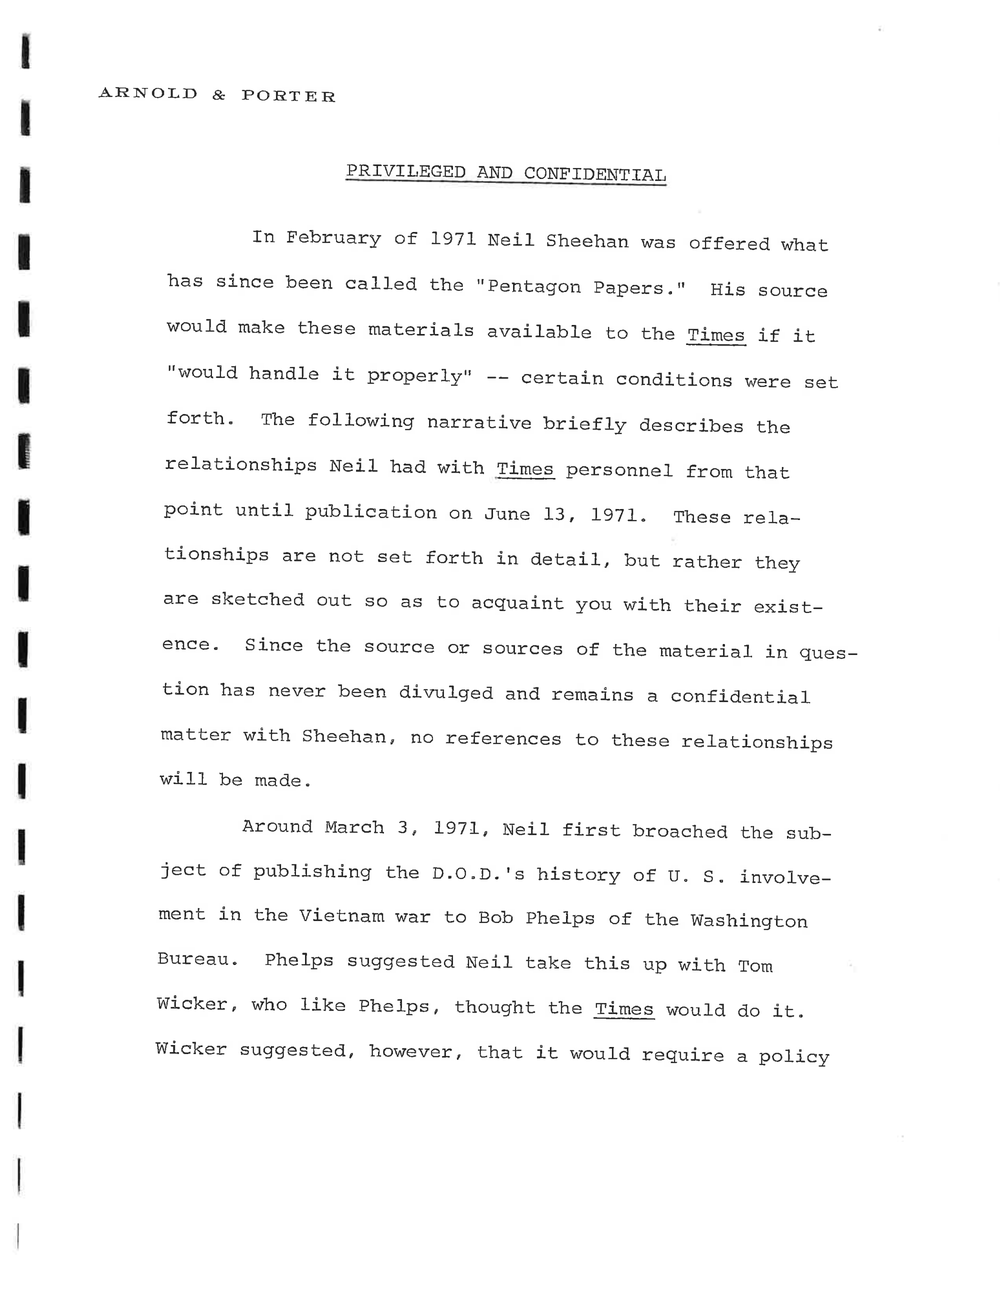 Page 1 from Rogovin Sheehan memo